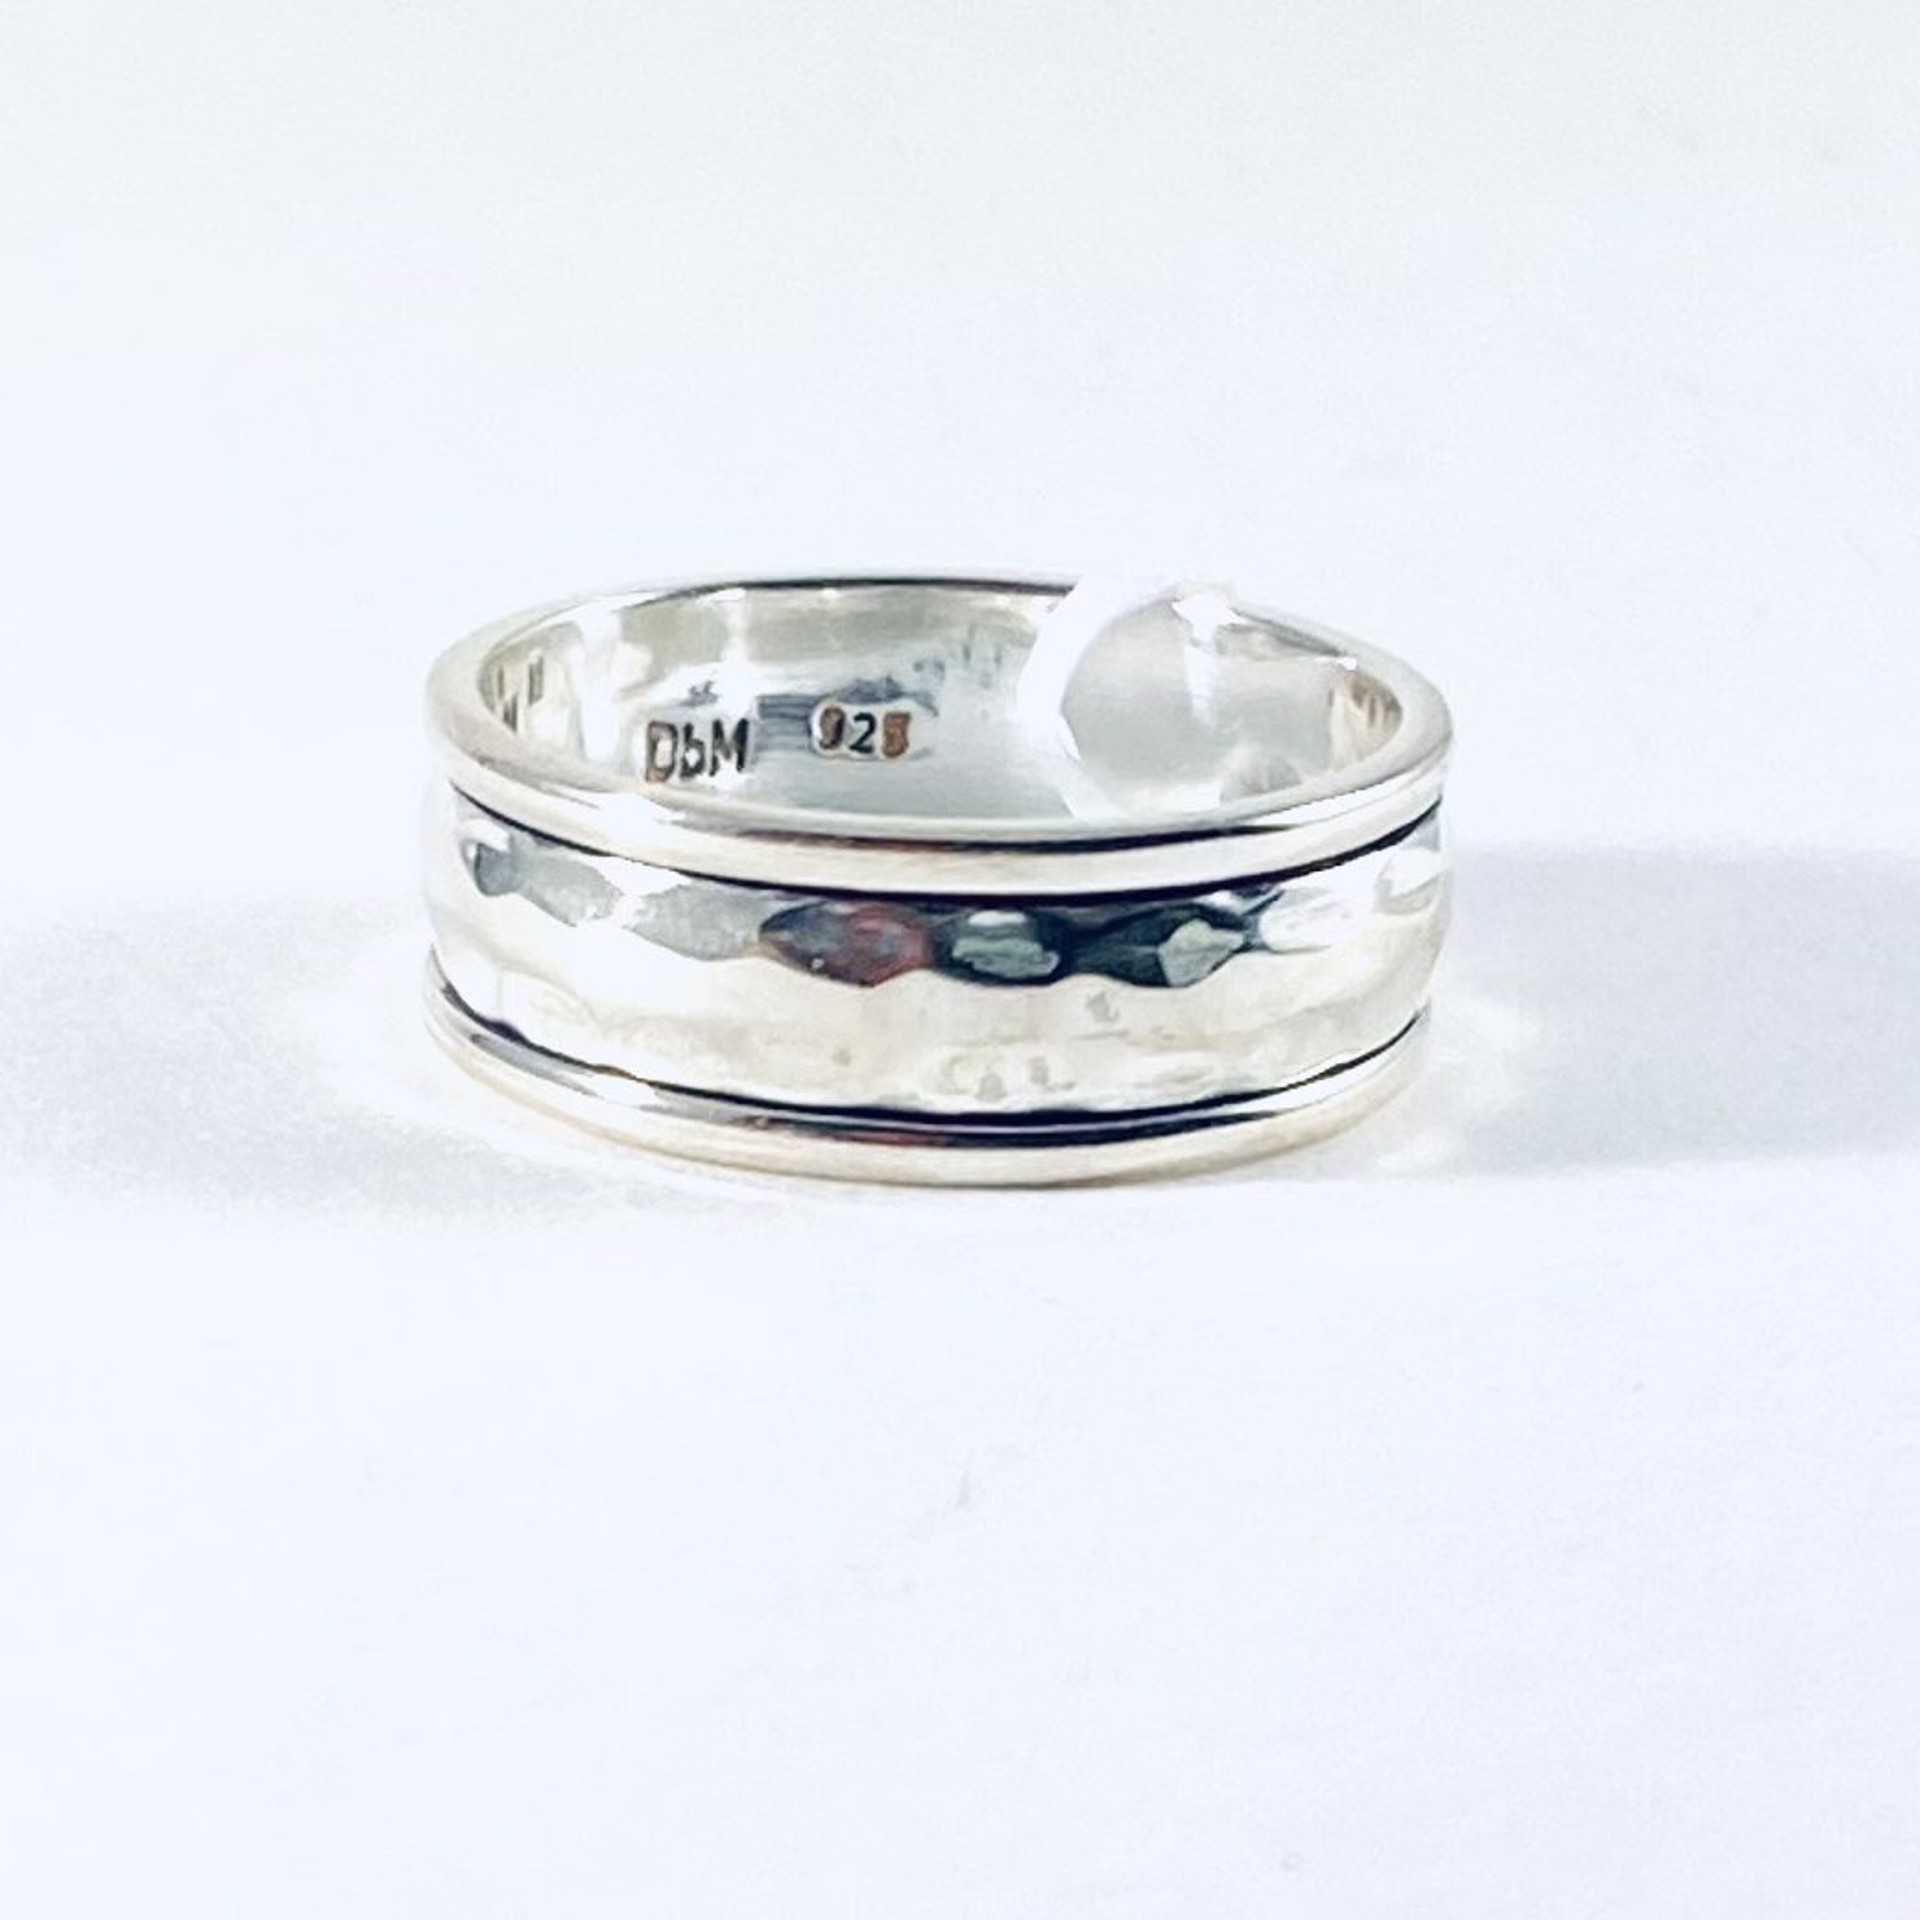 Silver Spin Ring LIMITED SIZES MONDR-2076 by Monica Mehta